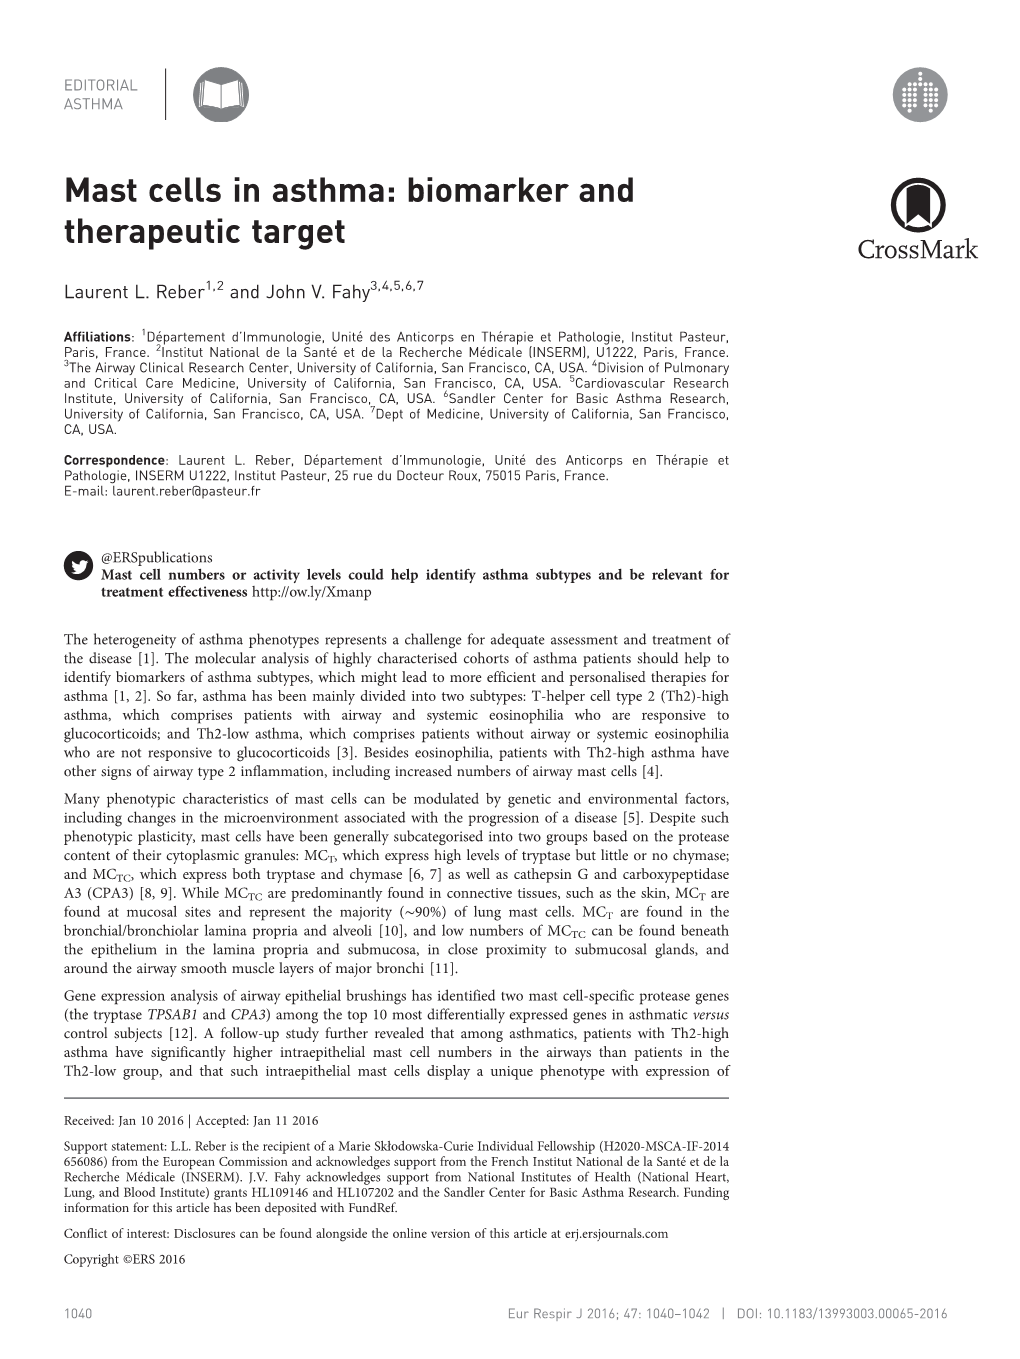 Mast Cells in Asthma: Biomarker and Therapeutic Target